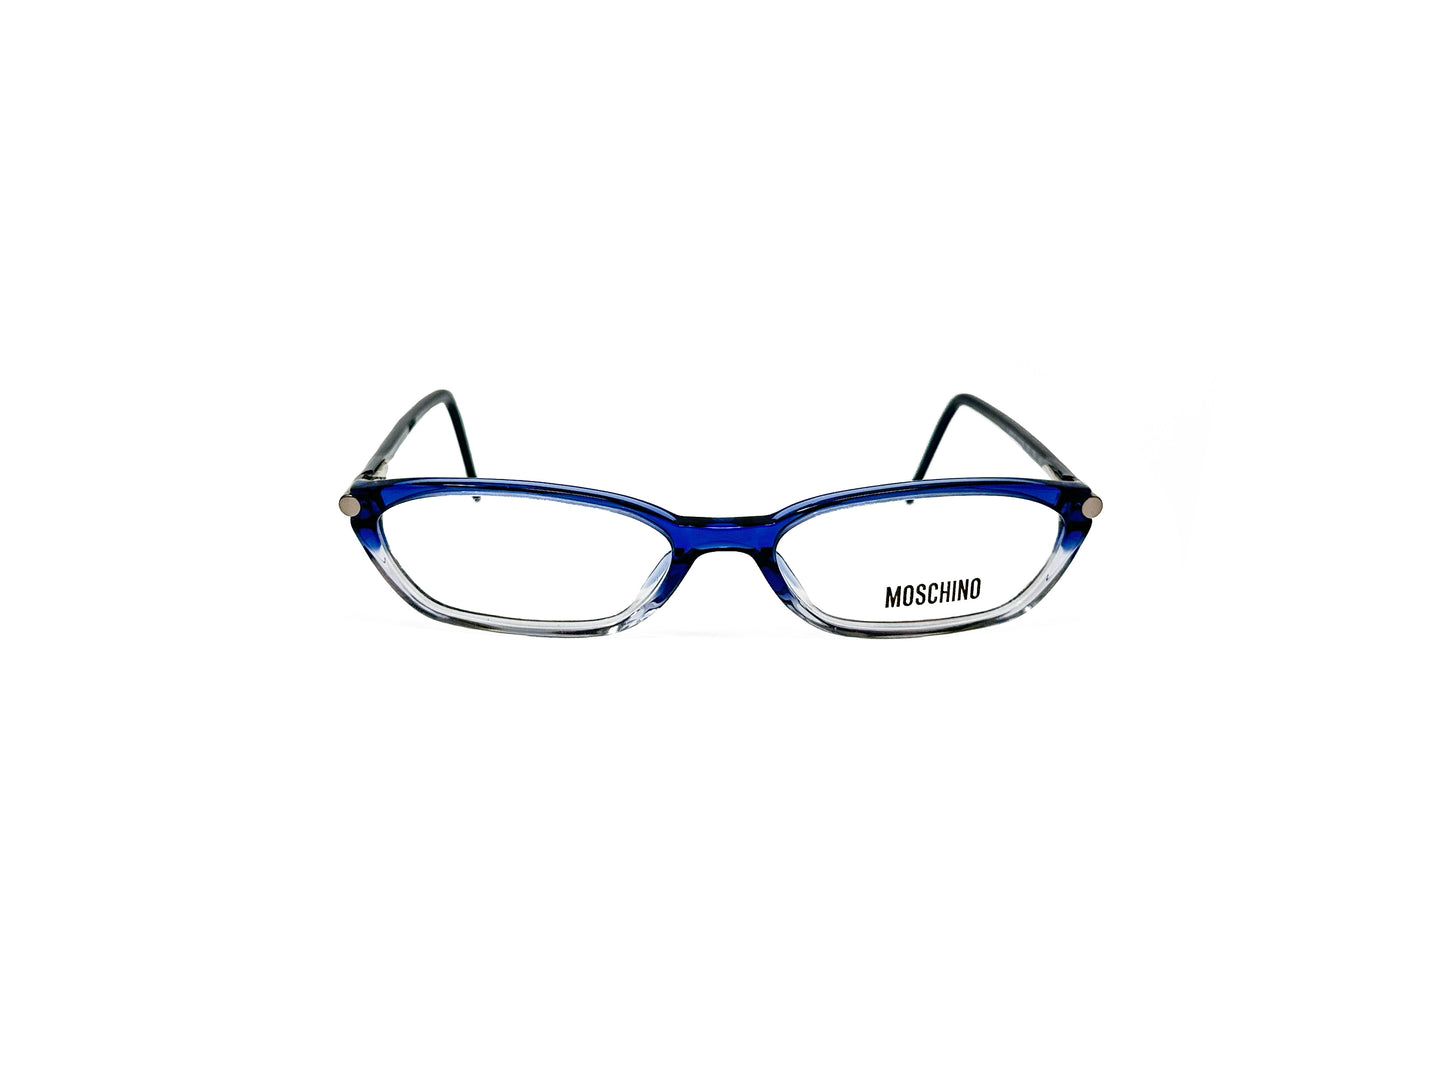 Moschino rectangular acetate optical frame. Model: M3615. Color: 320 Blue to clear gradient. Front view. 